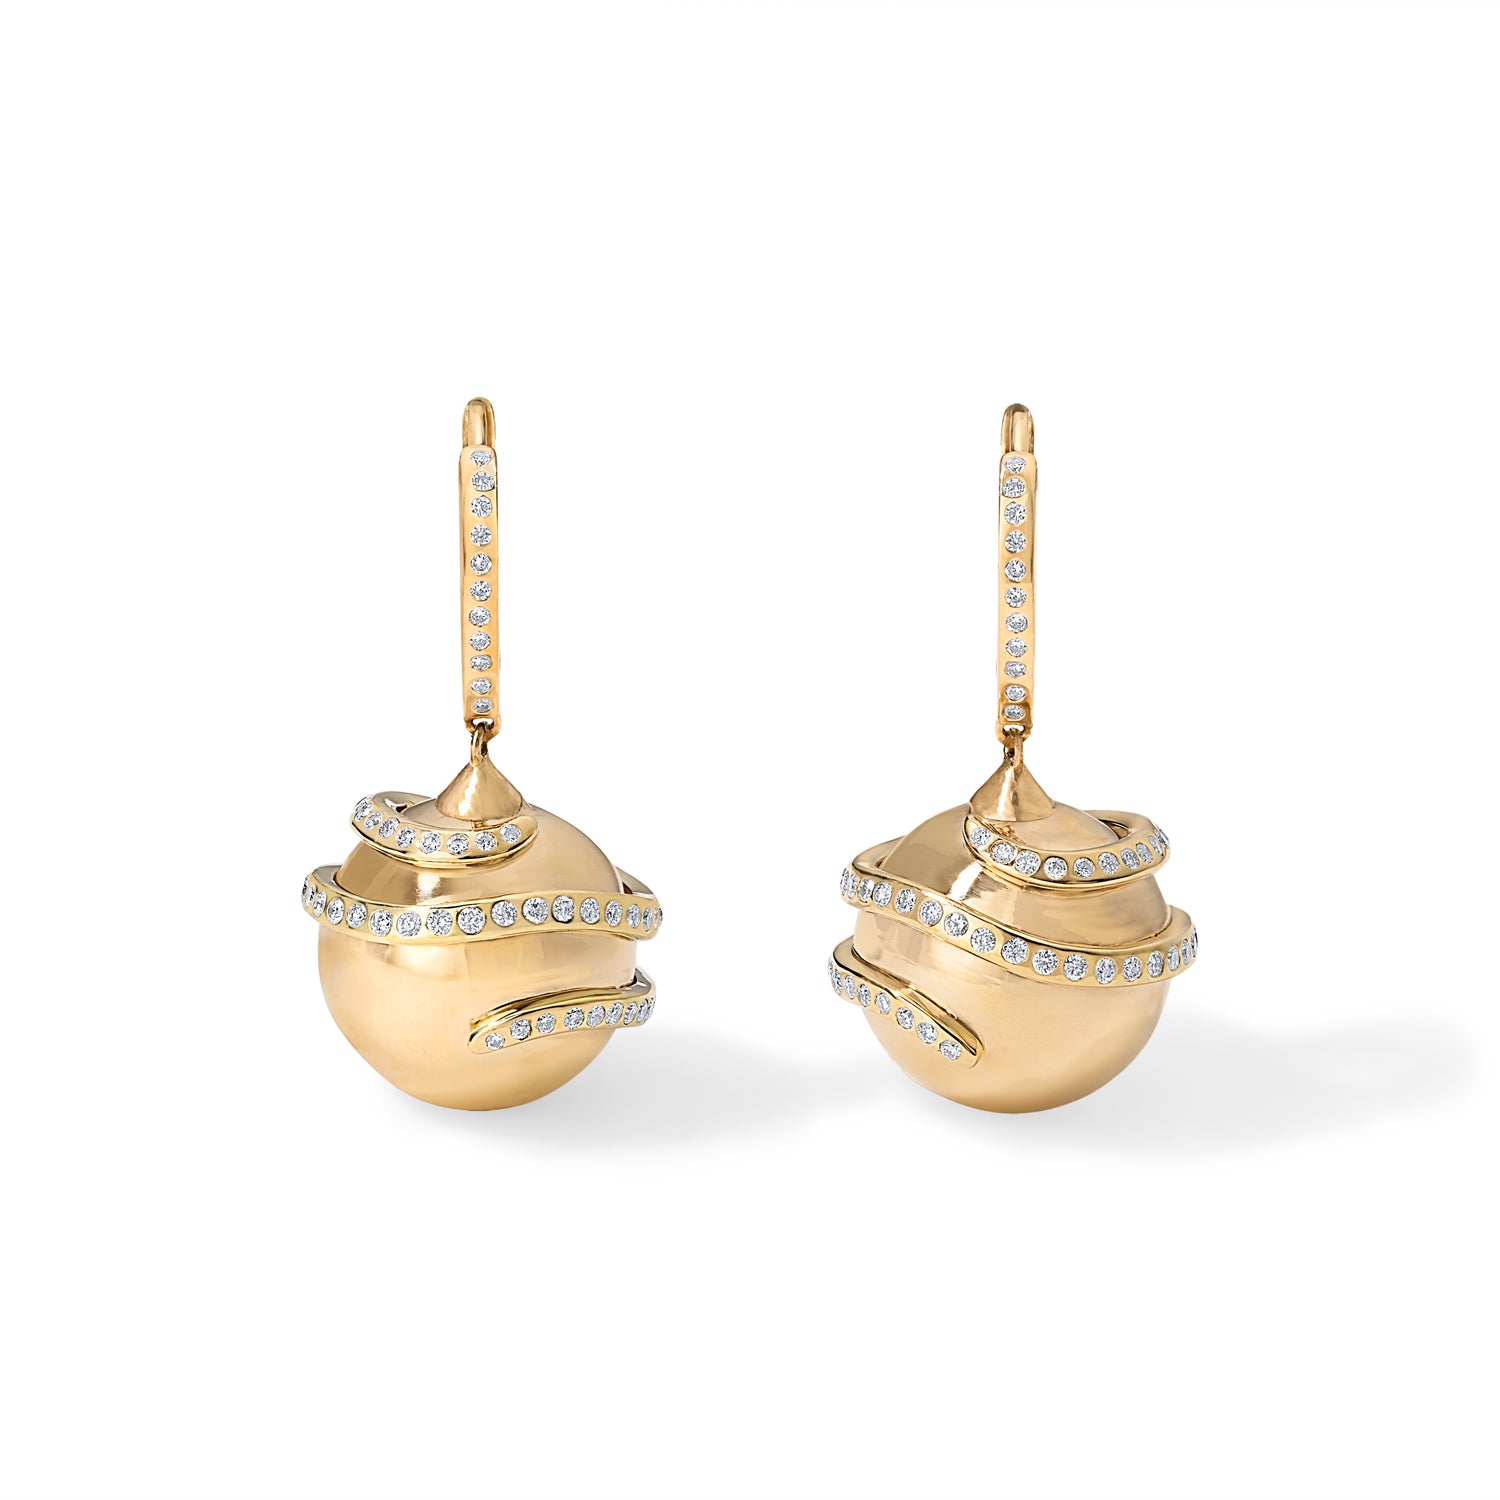 Gold Bead and Pave Earrings